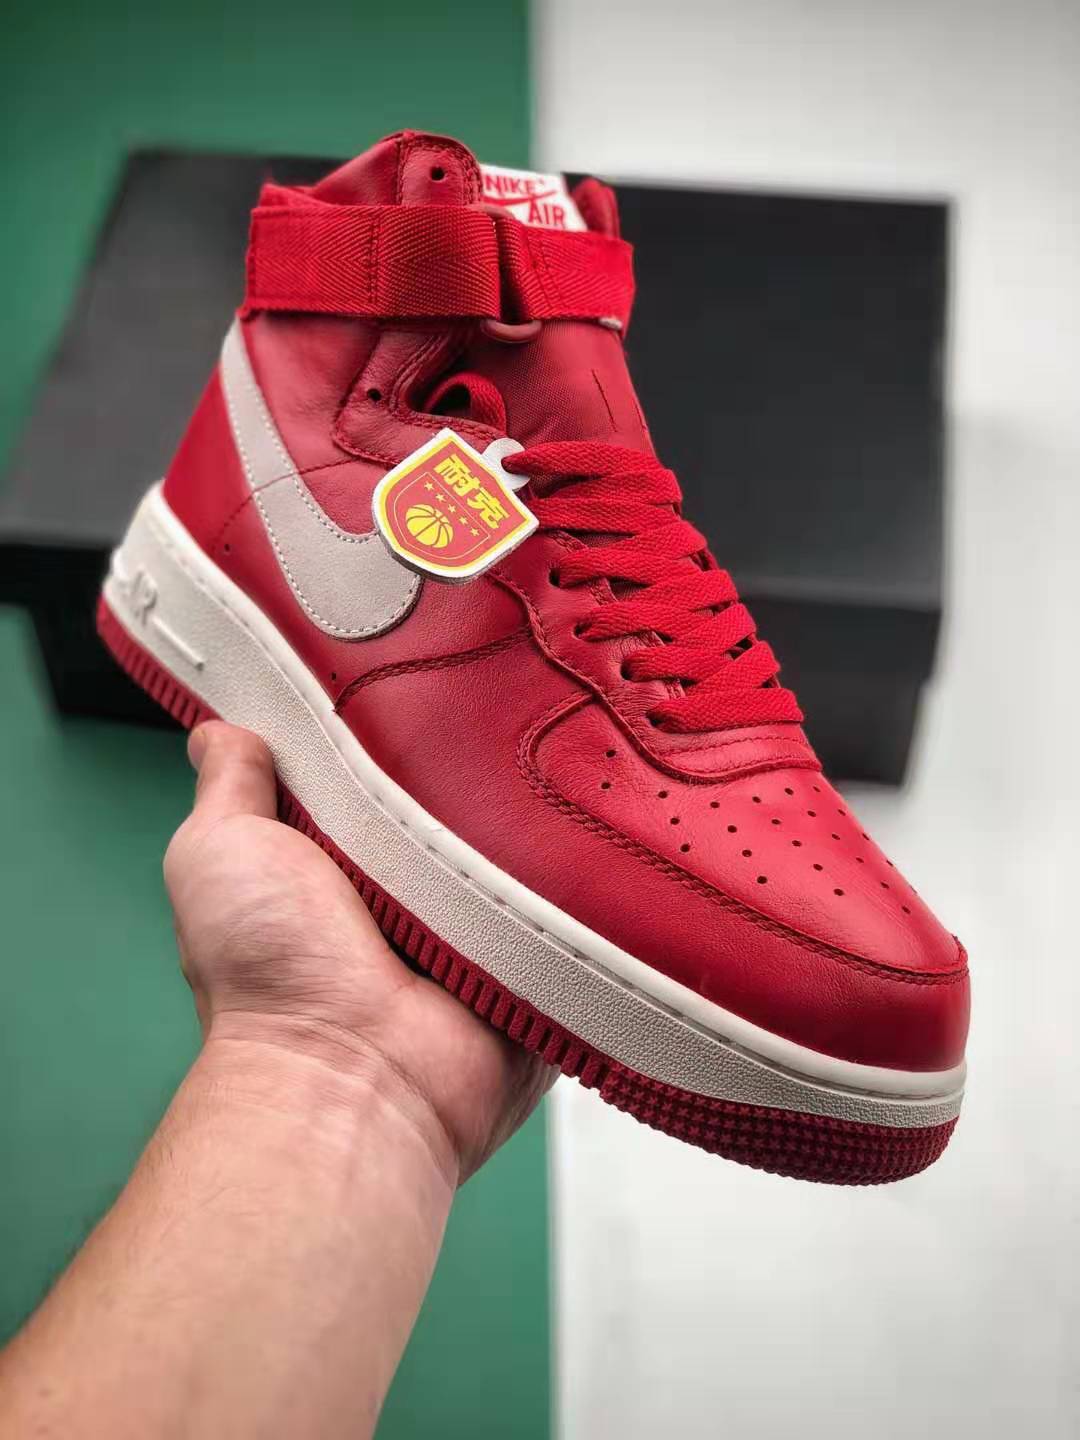 Nike Air Force 1 High NAI-KE Gym Red 2015 743546-600 - Buy Now for Classic Style!